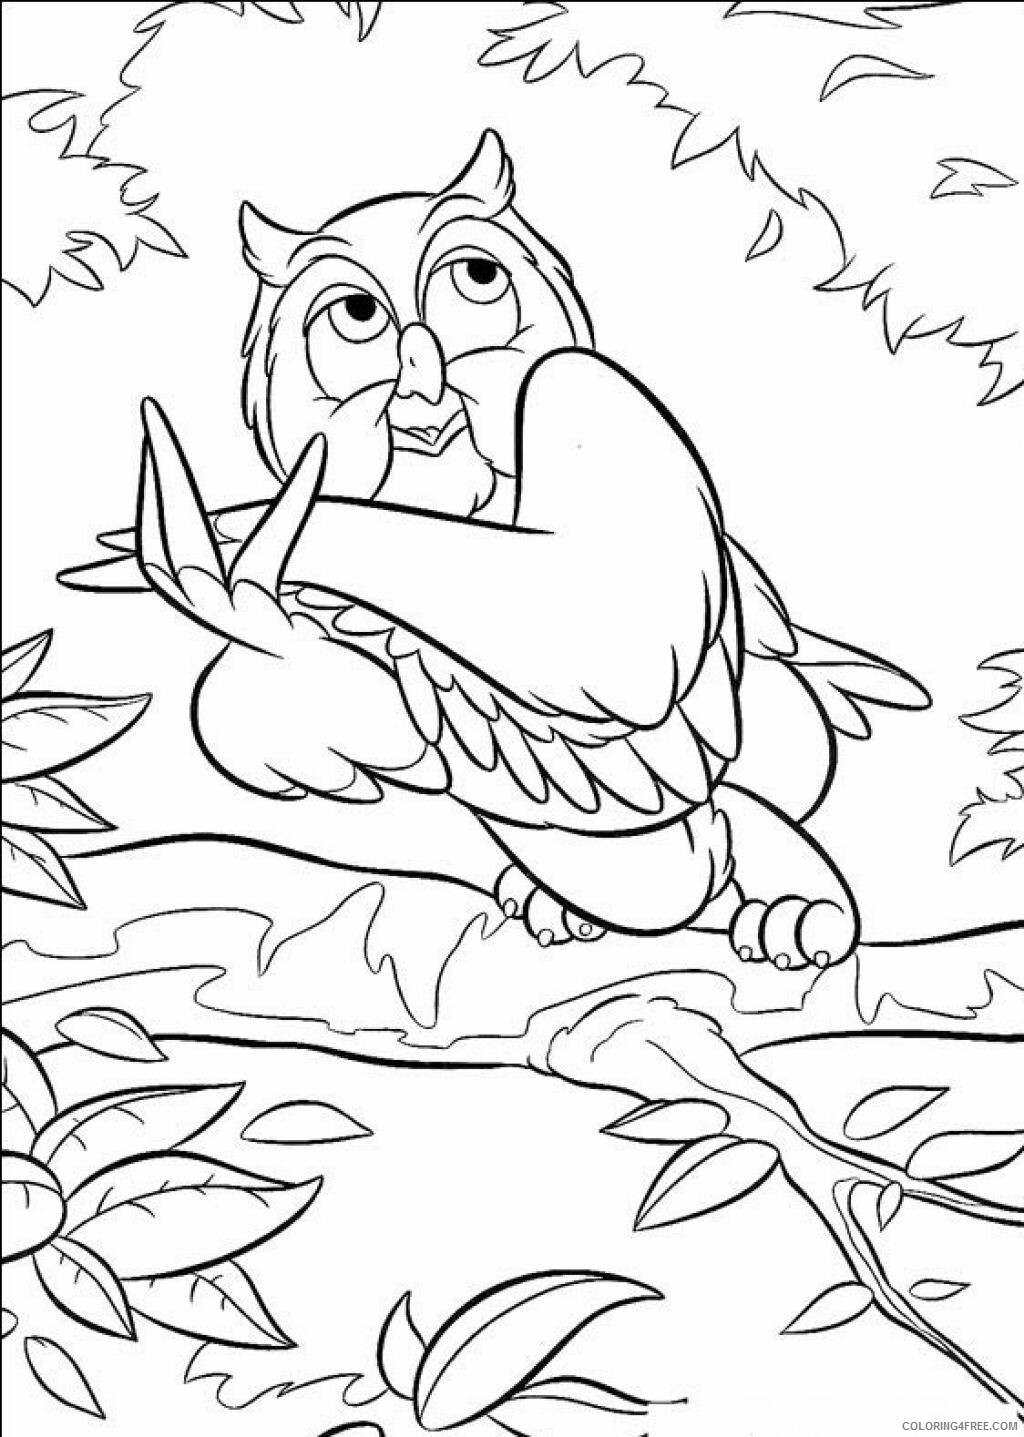 Owl Coloring Pages Animal Printable Sheets Printable of Owls 2021 3664 Coloring4free